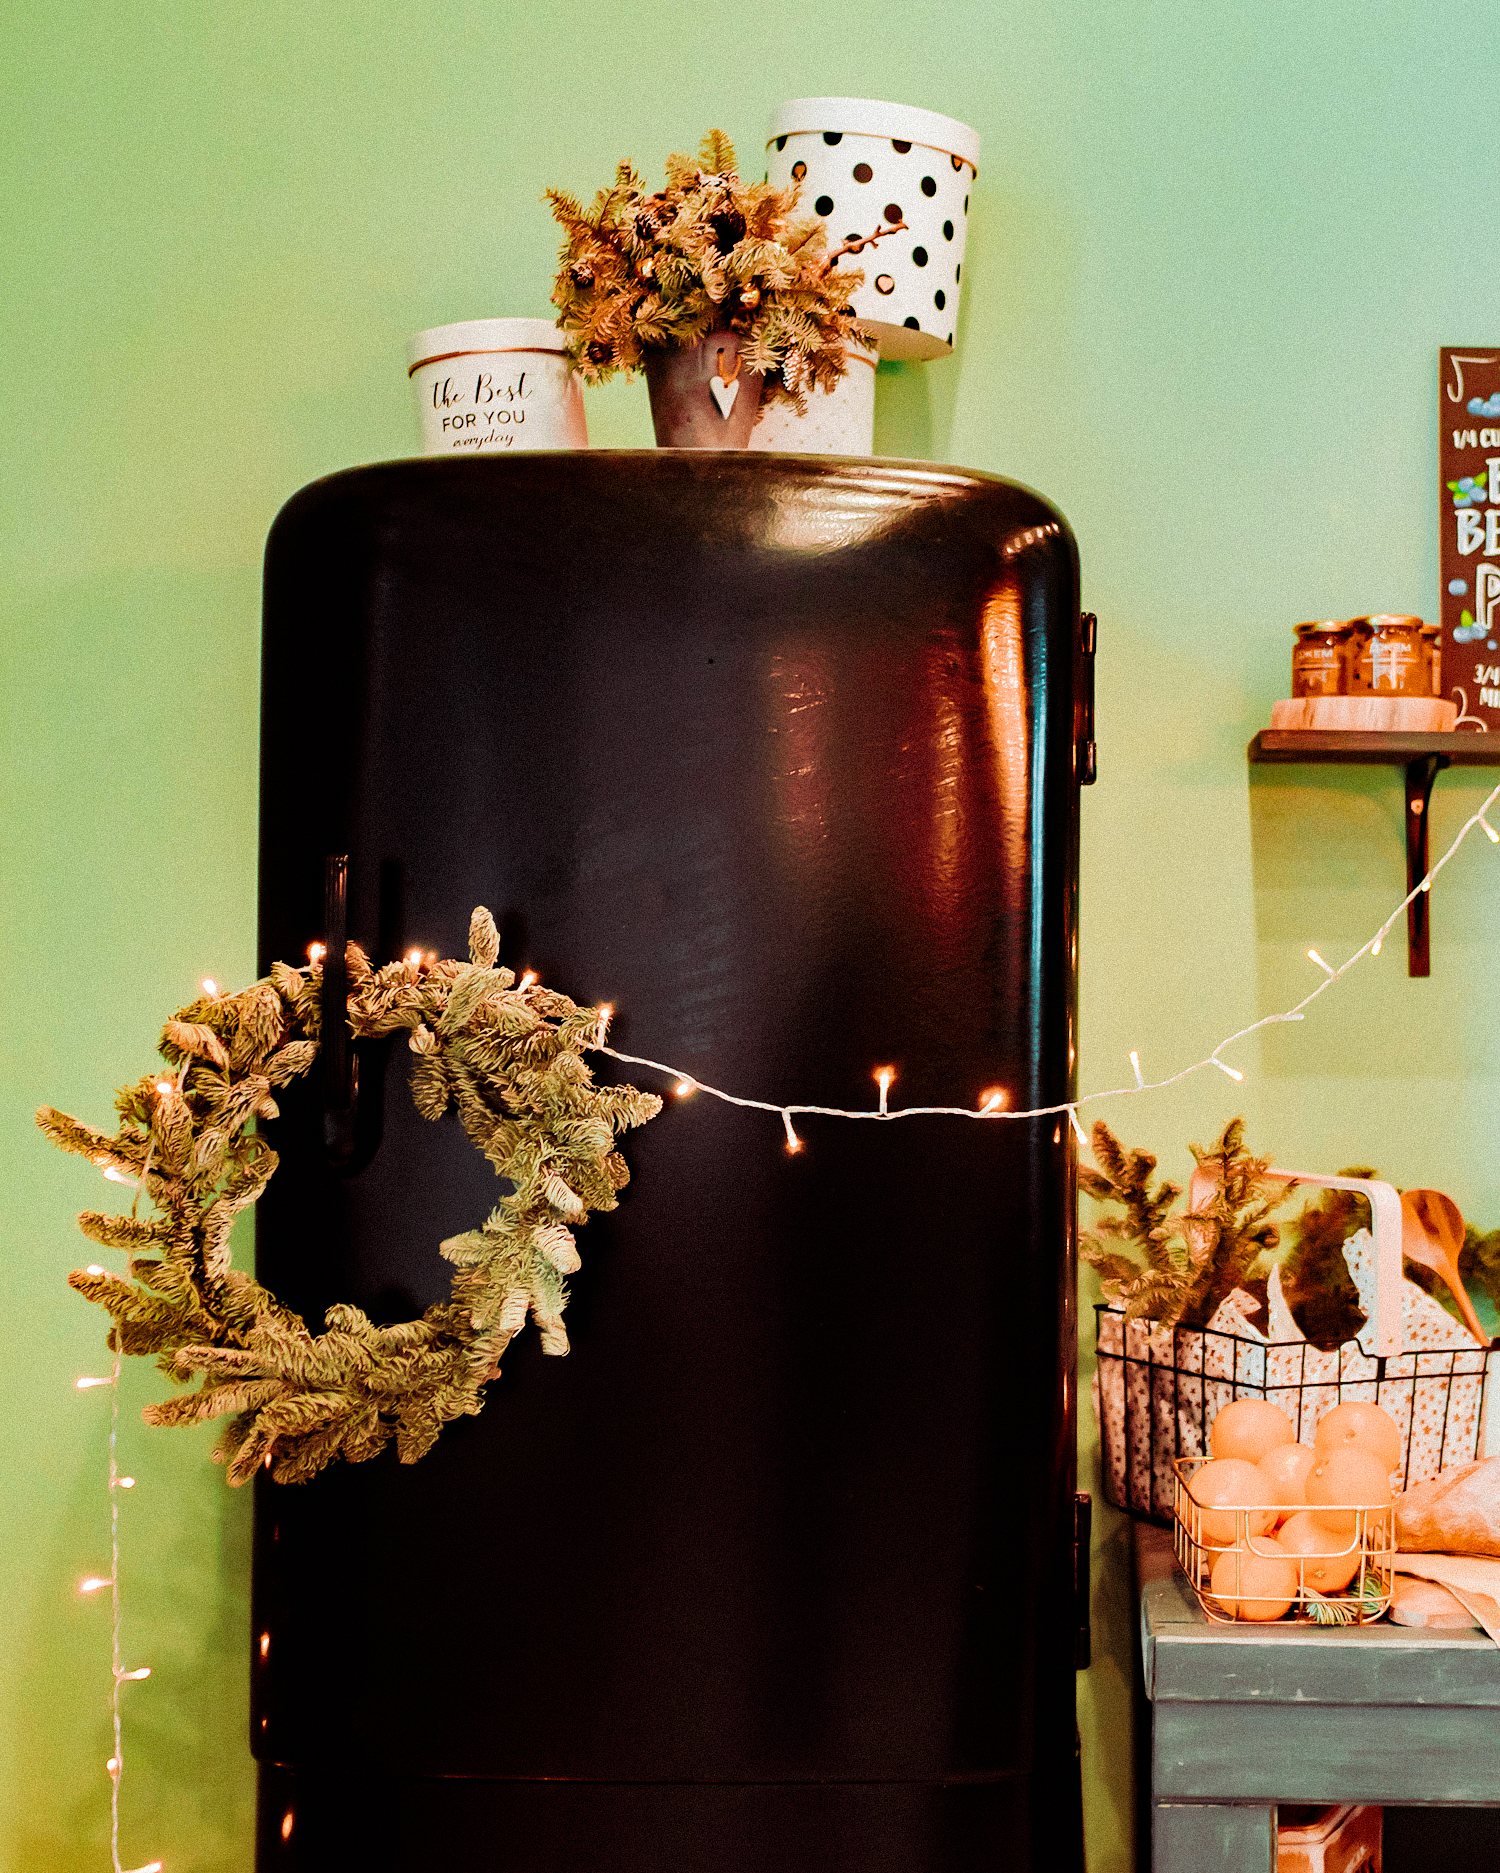 The decor of Christmas and New year.  Kitchen with black retro refrigerator